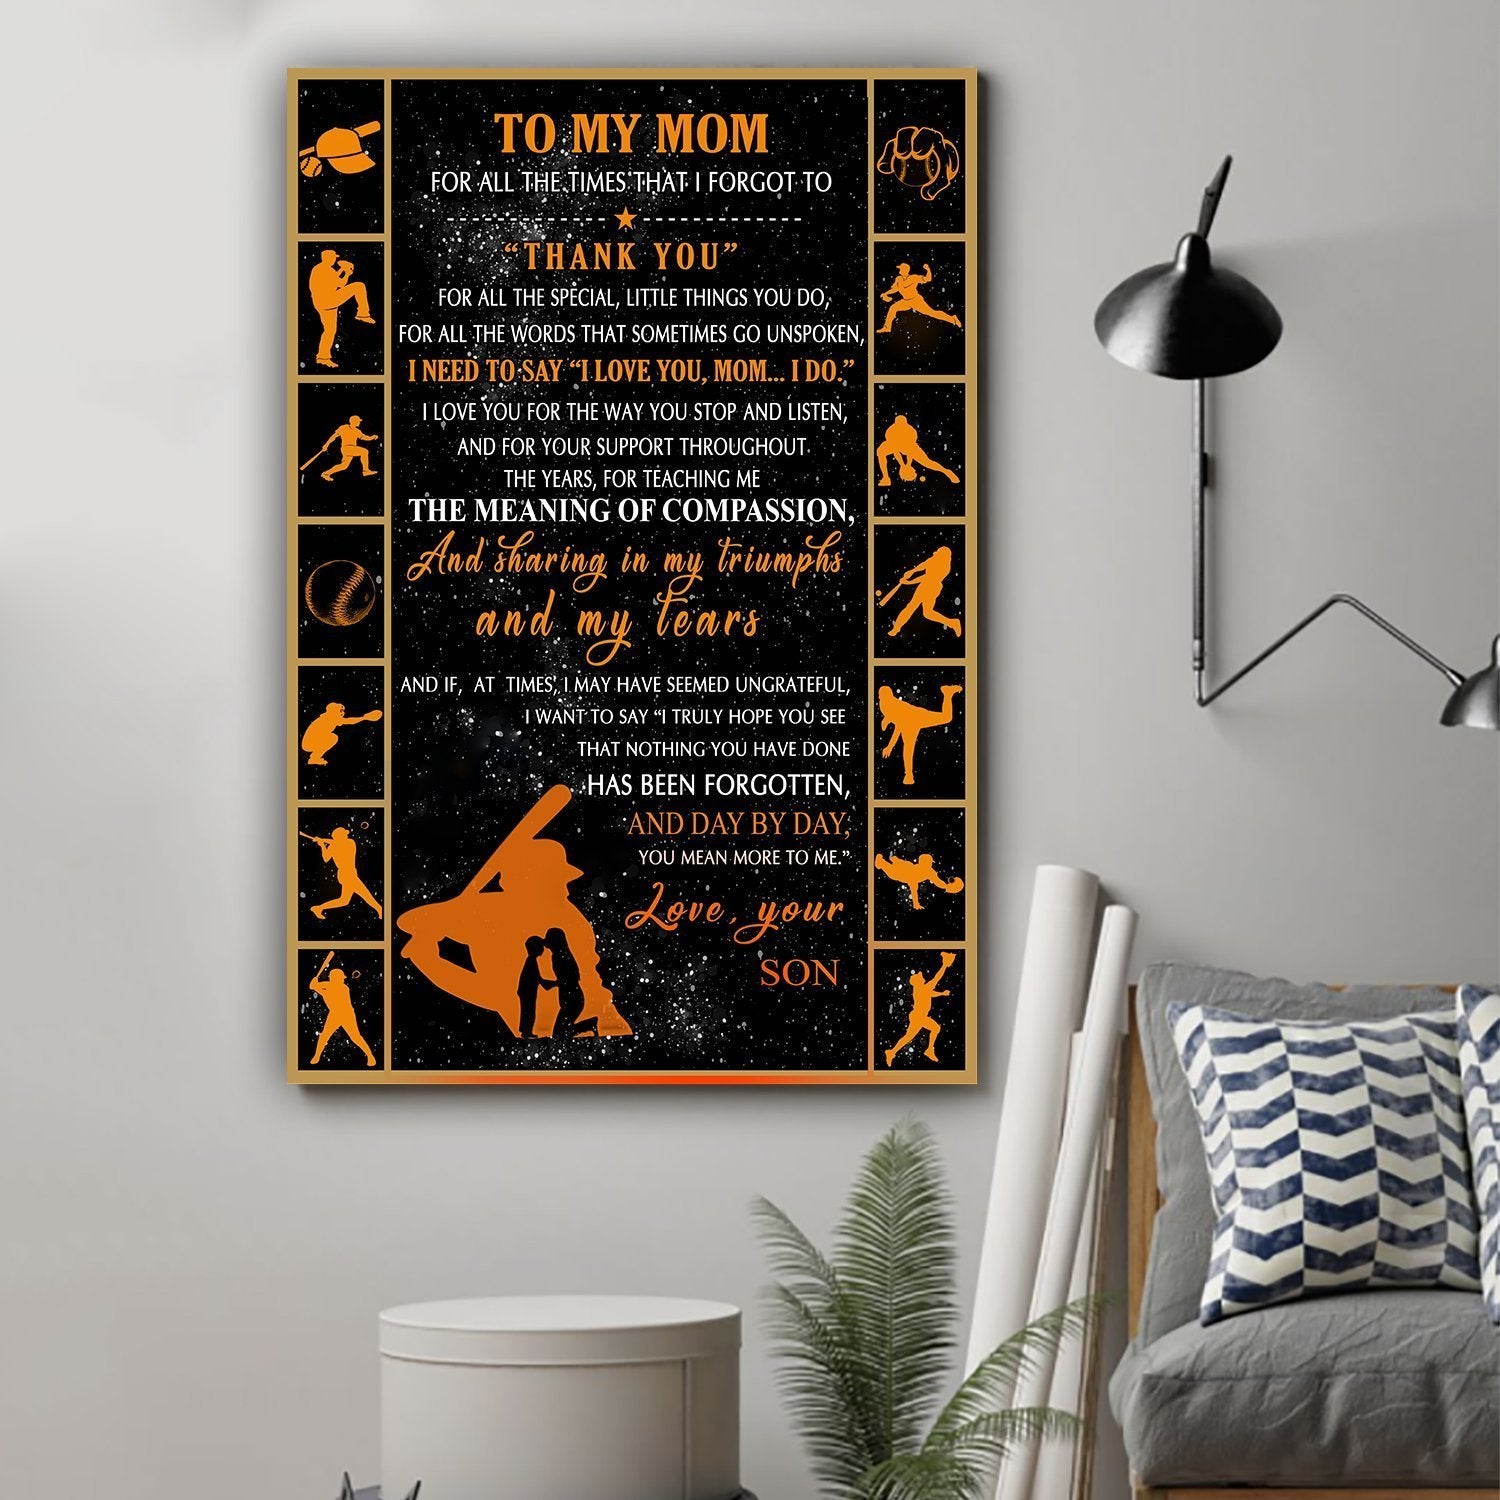 You Mean More To Be Baseball Canvas And Poster, Best Mother s Day Gift Ideas, Mother s Day Gift From Son To Mom, Warm Home Decor Wall Art Visual Art 1598332172193.jpg